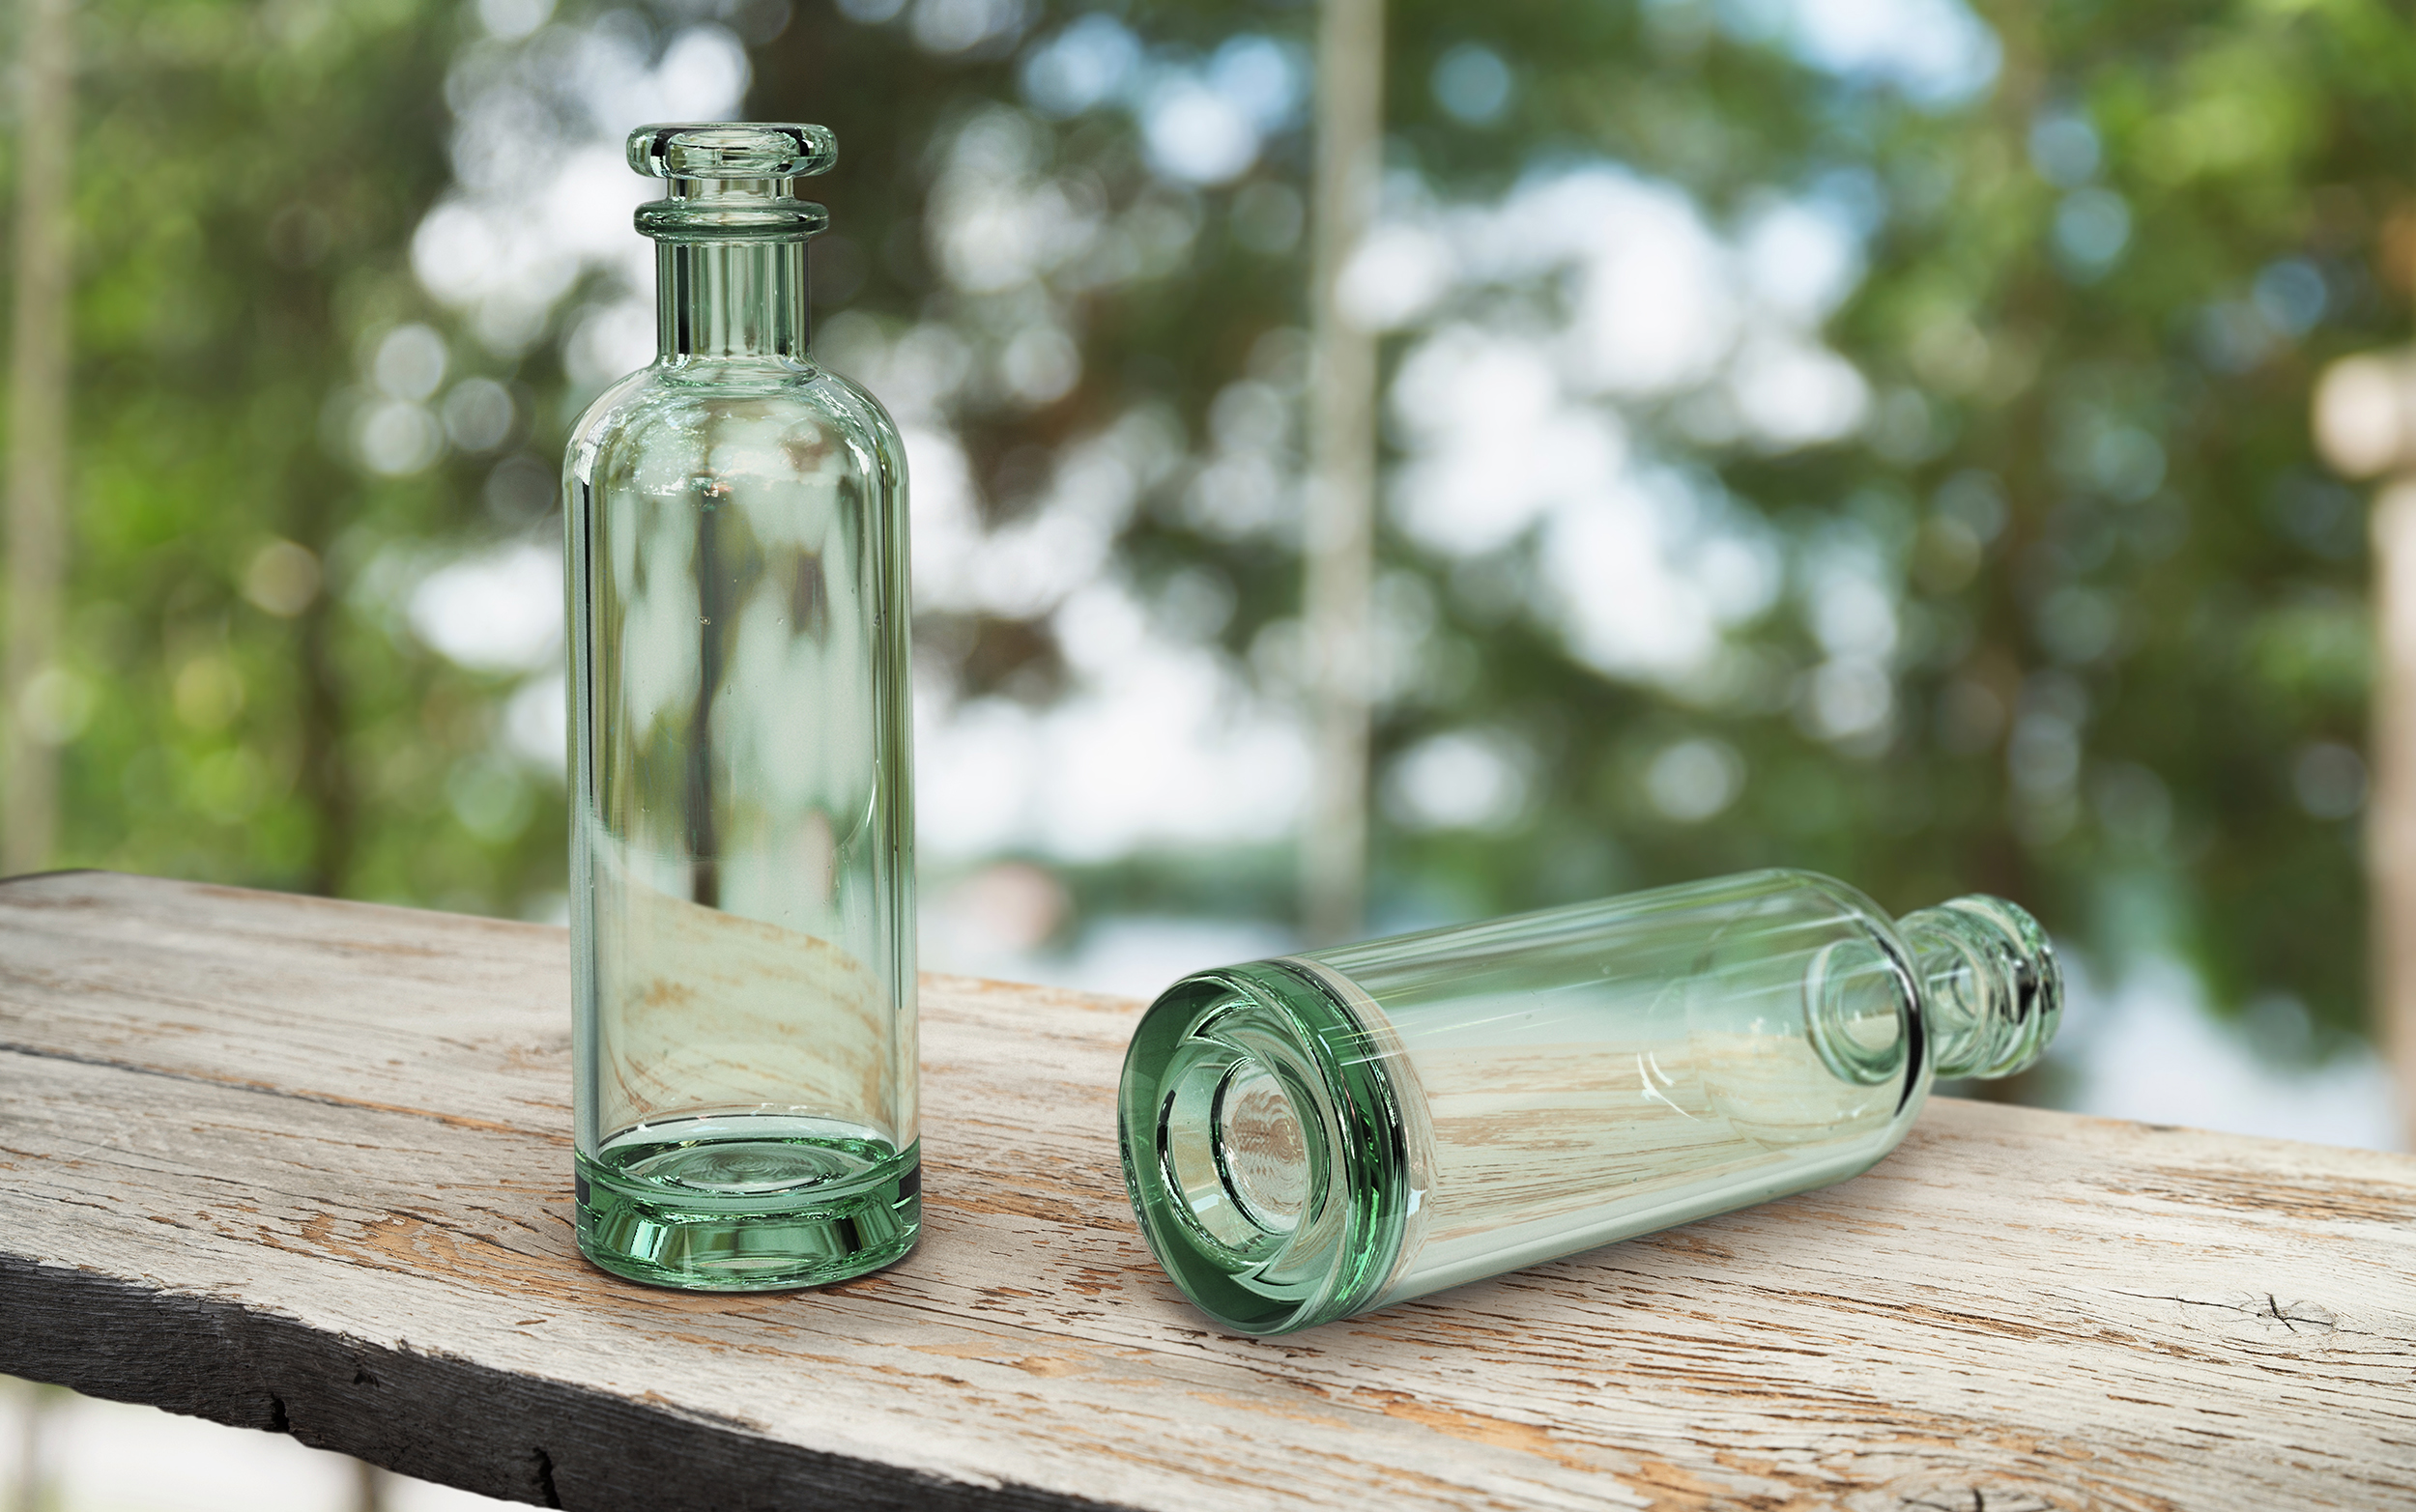 Recycled glass bottles from Estal